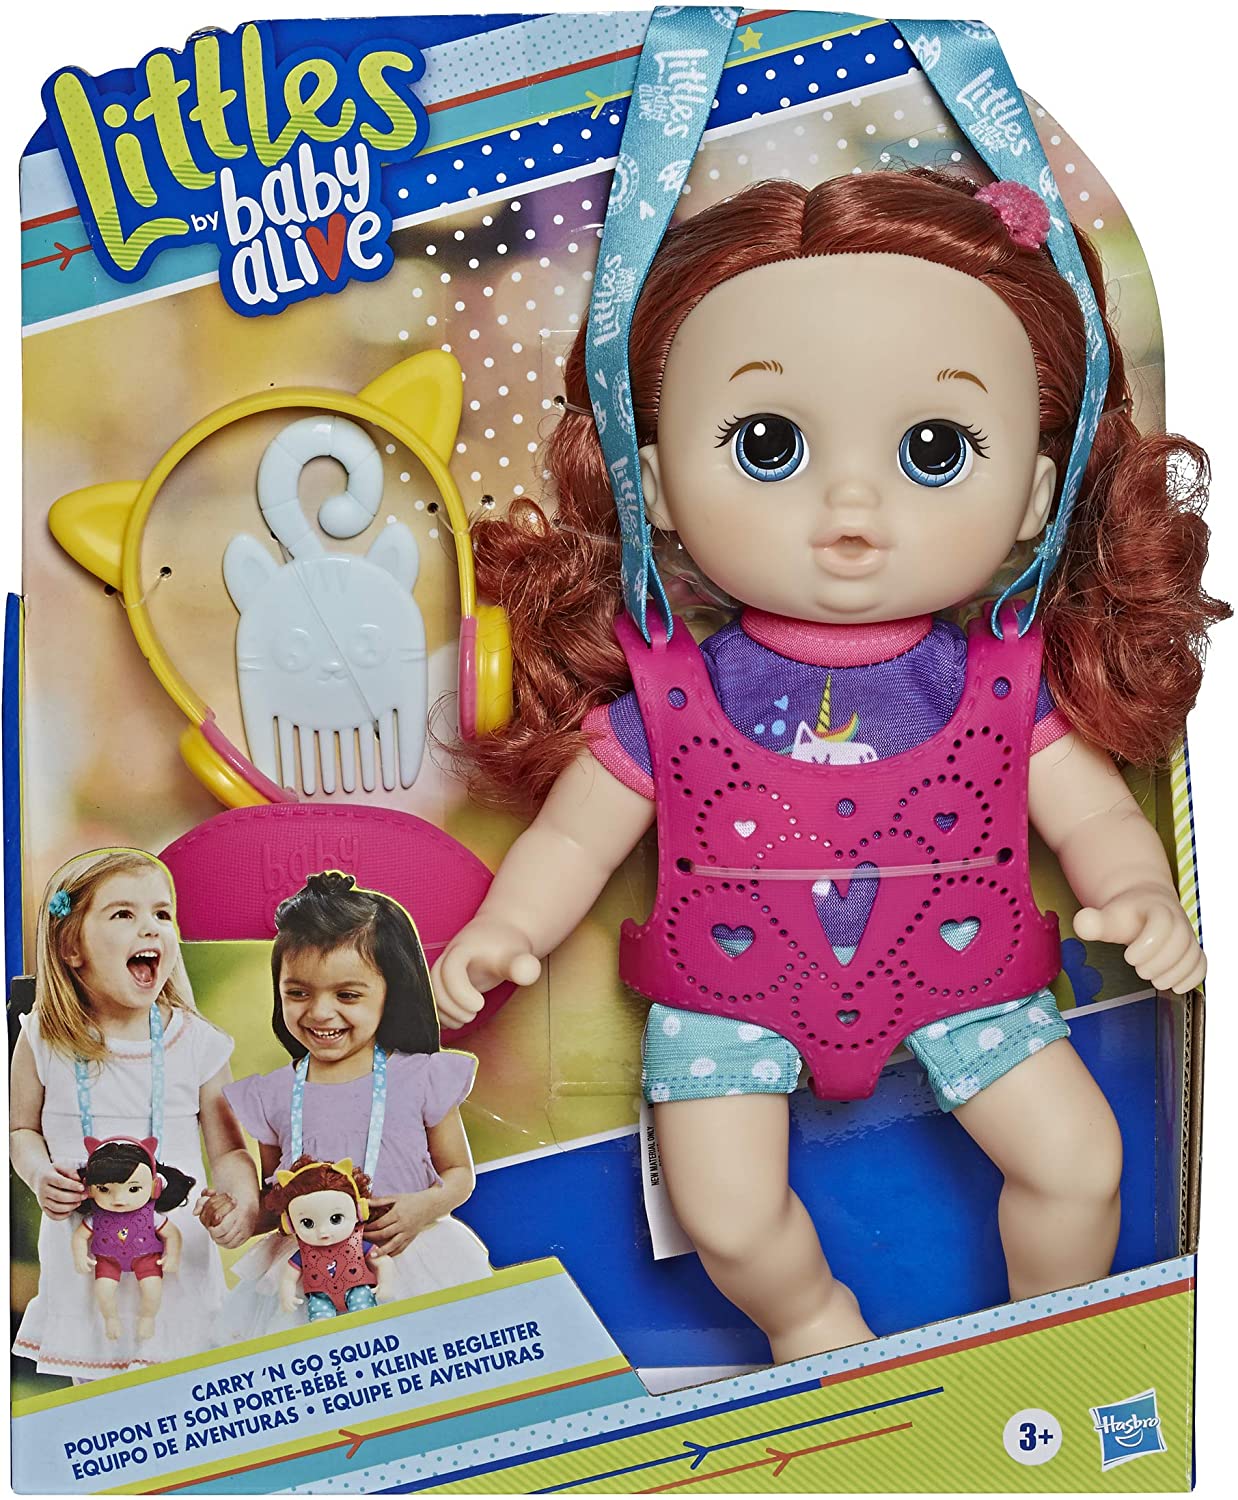 redhead baby alive